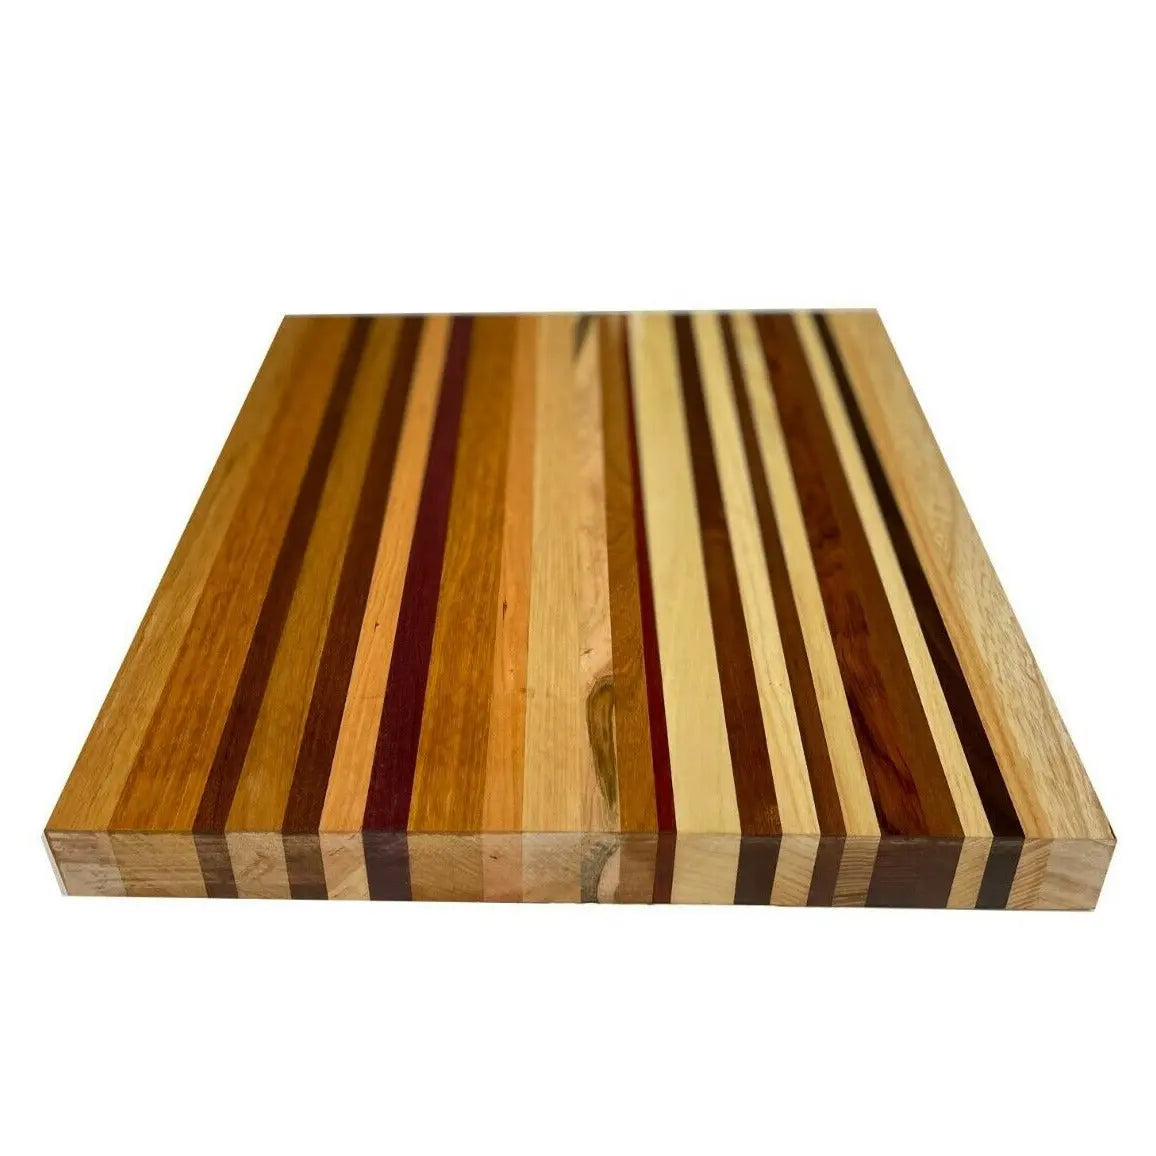 Pack Of 2, Unfinished Wild Grain Cutting Board Blocks/Chopping Boards - Exotic Wood Zone - Buy online Across USA 